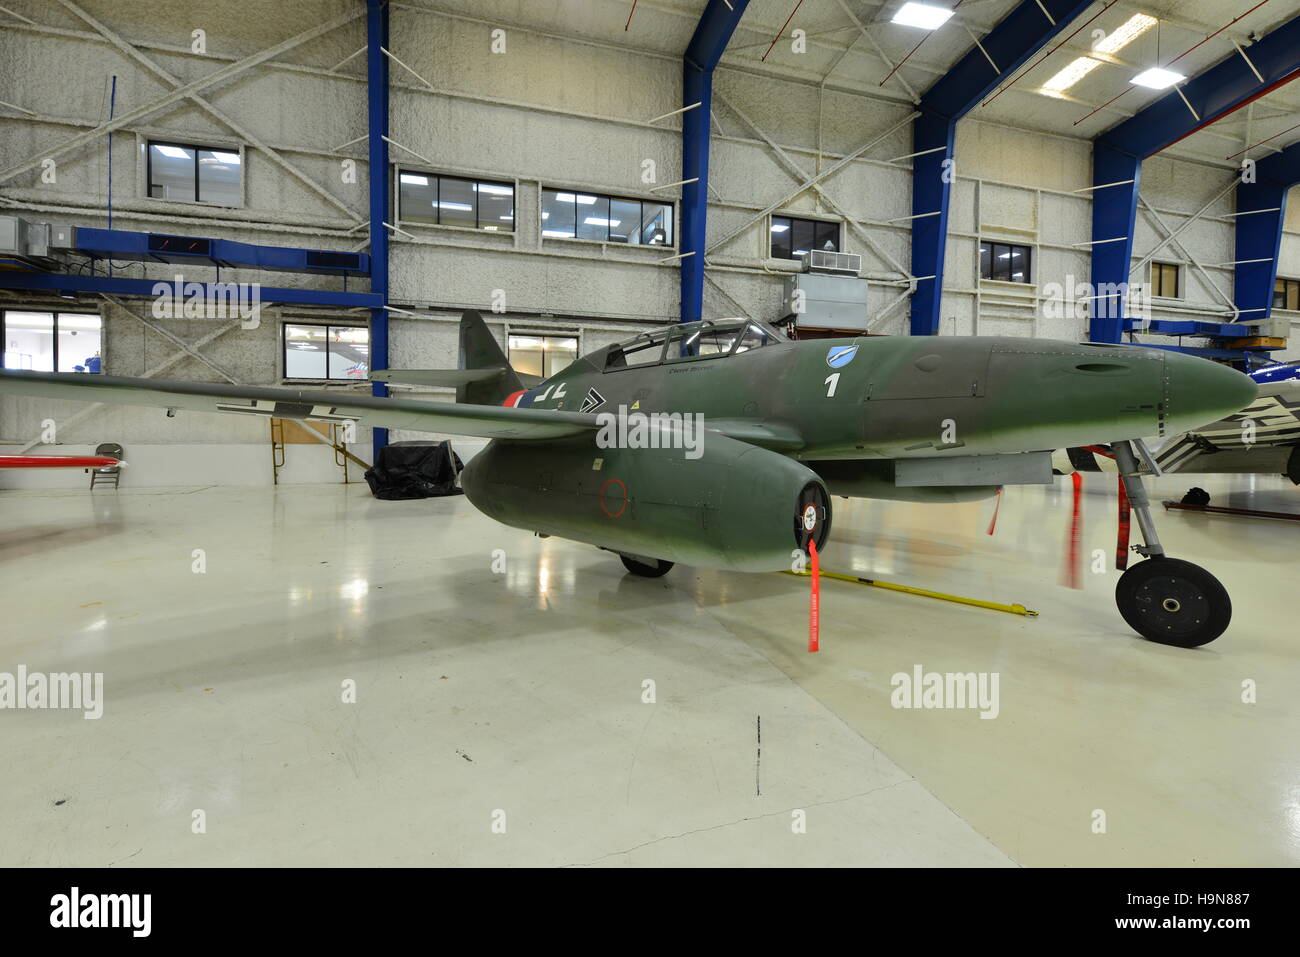 A vintage aircraft at a museum in Galveston. Stock Photo